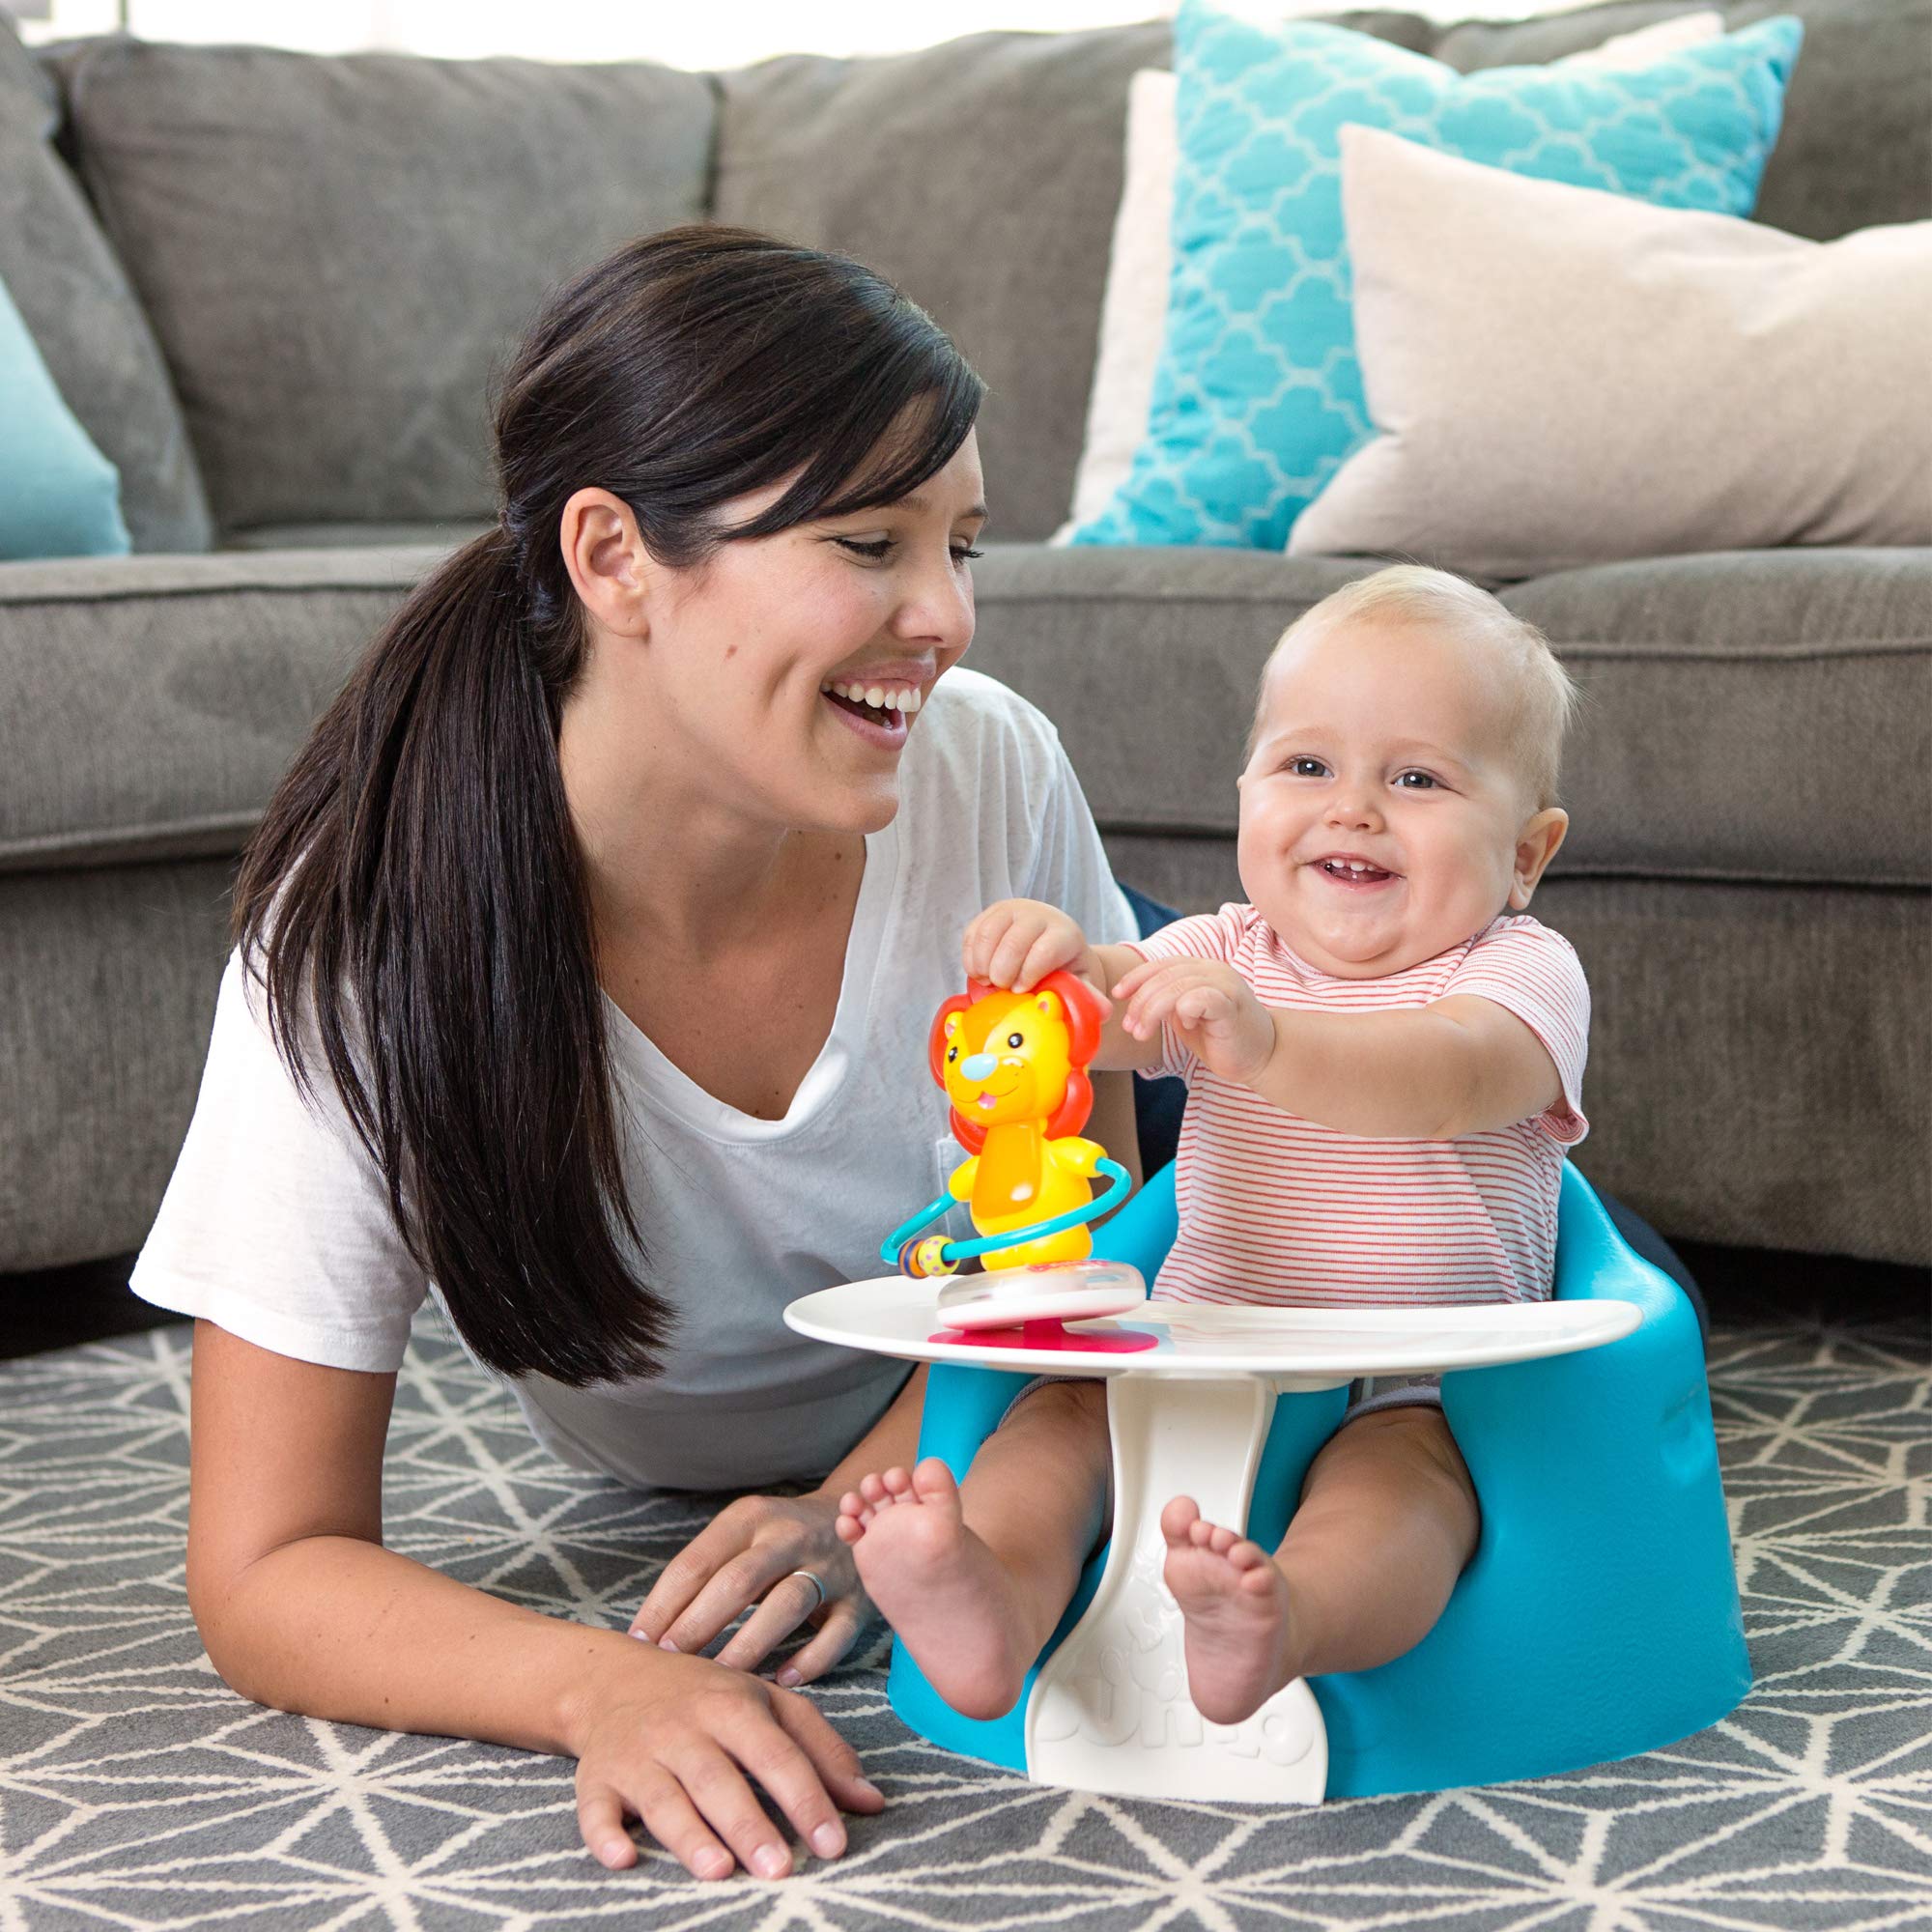 Bumbo Play Tray - Feeding Tray and Play Surface for Bumbo Floor Seat